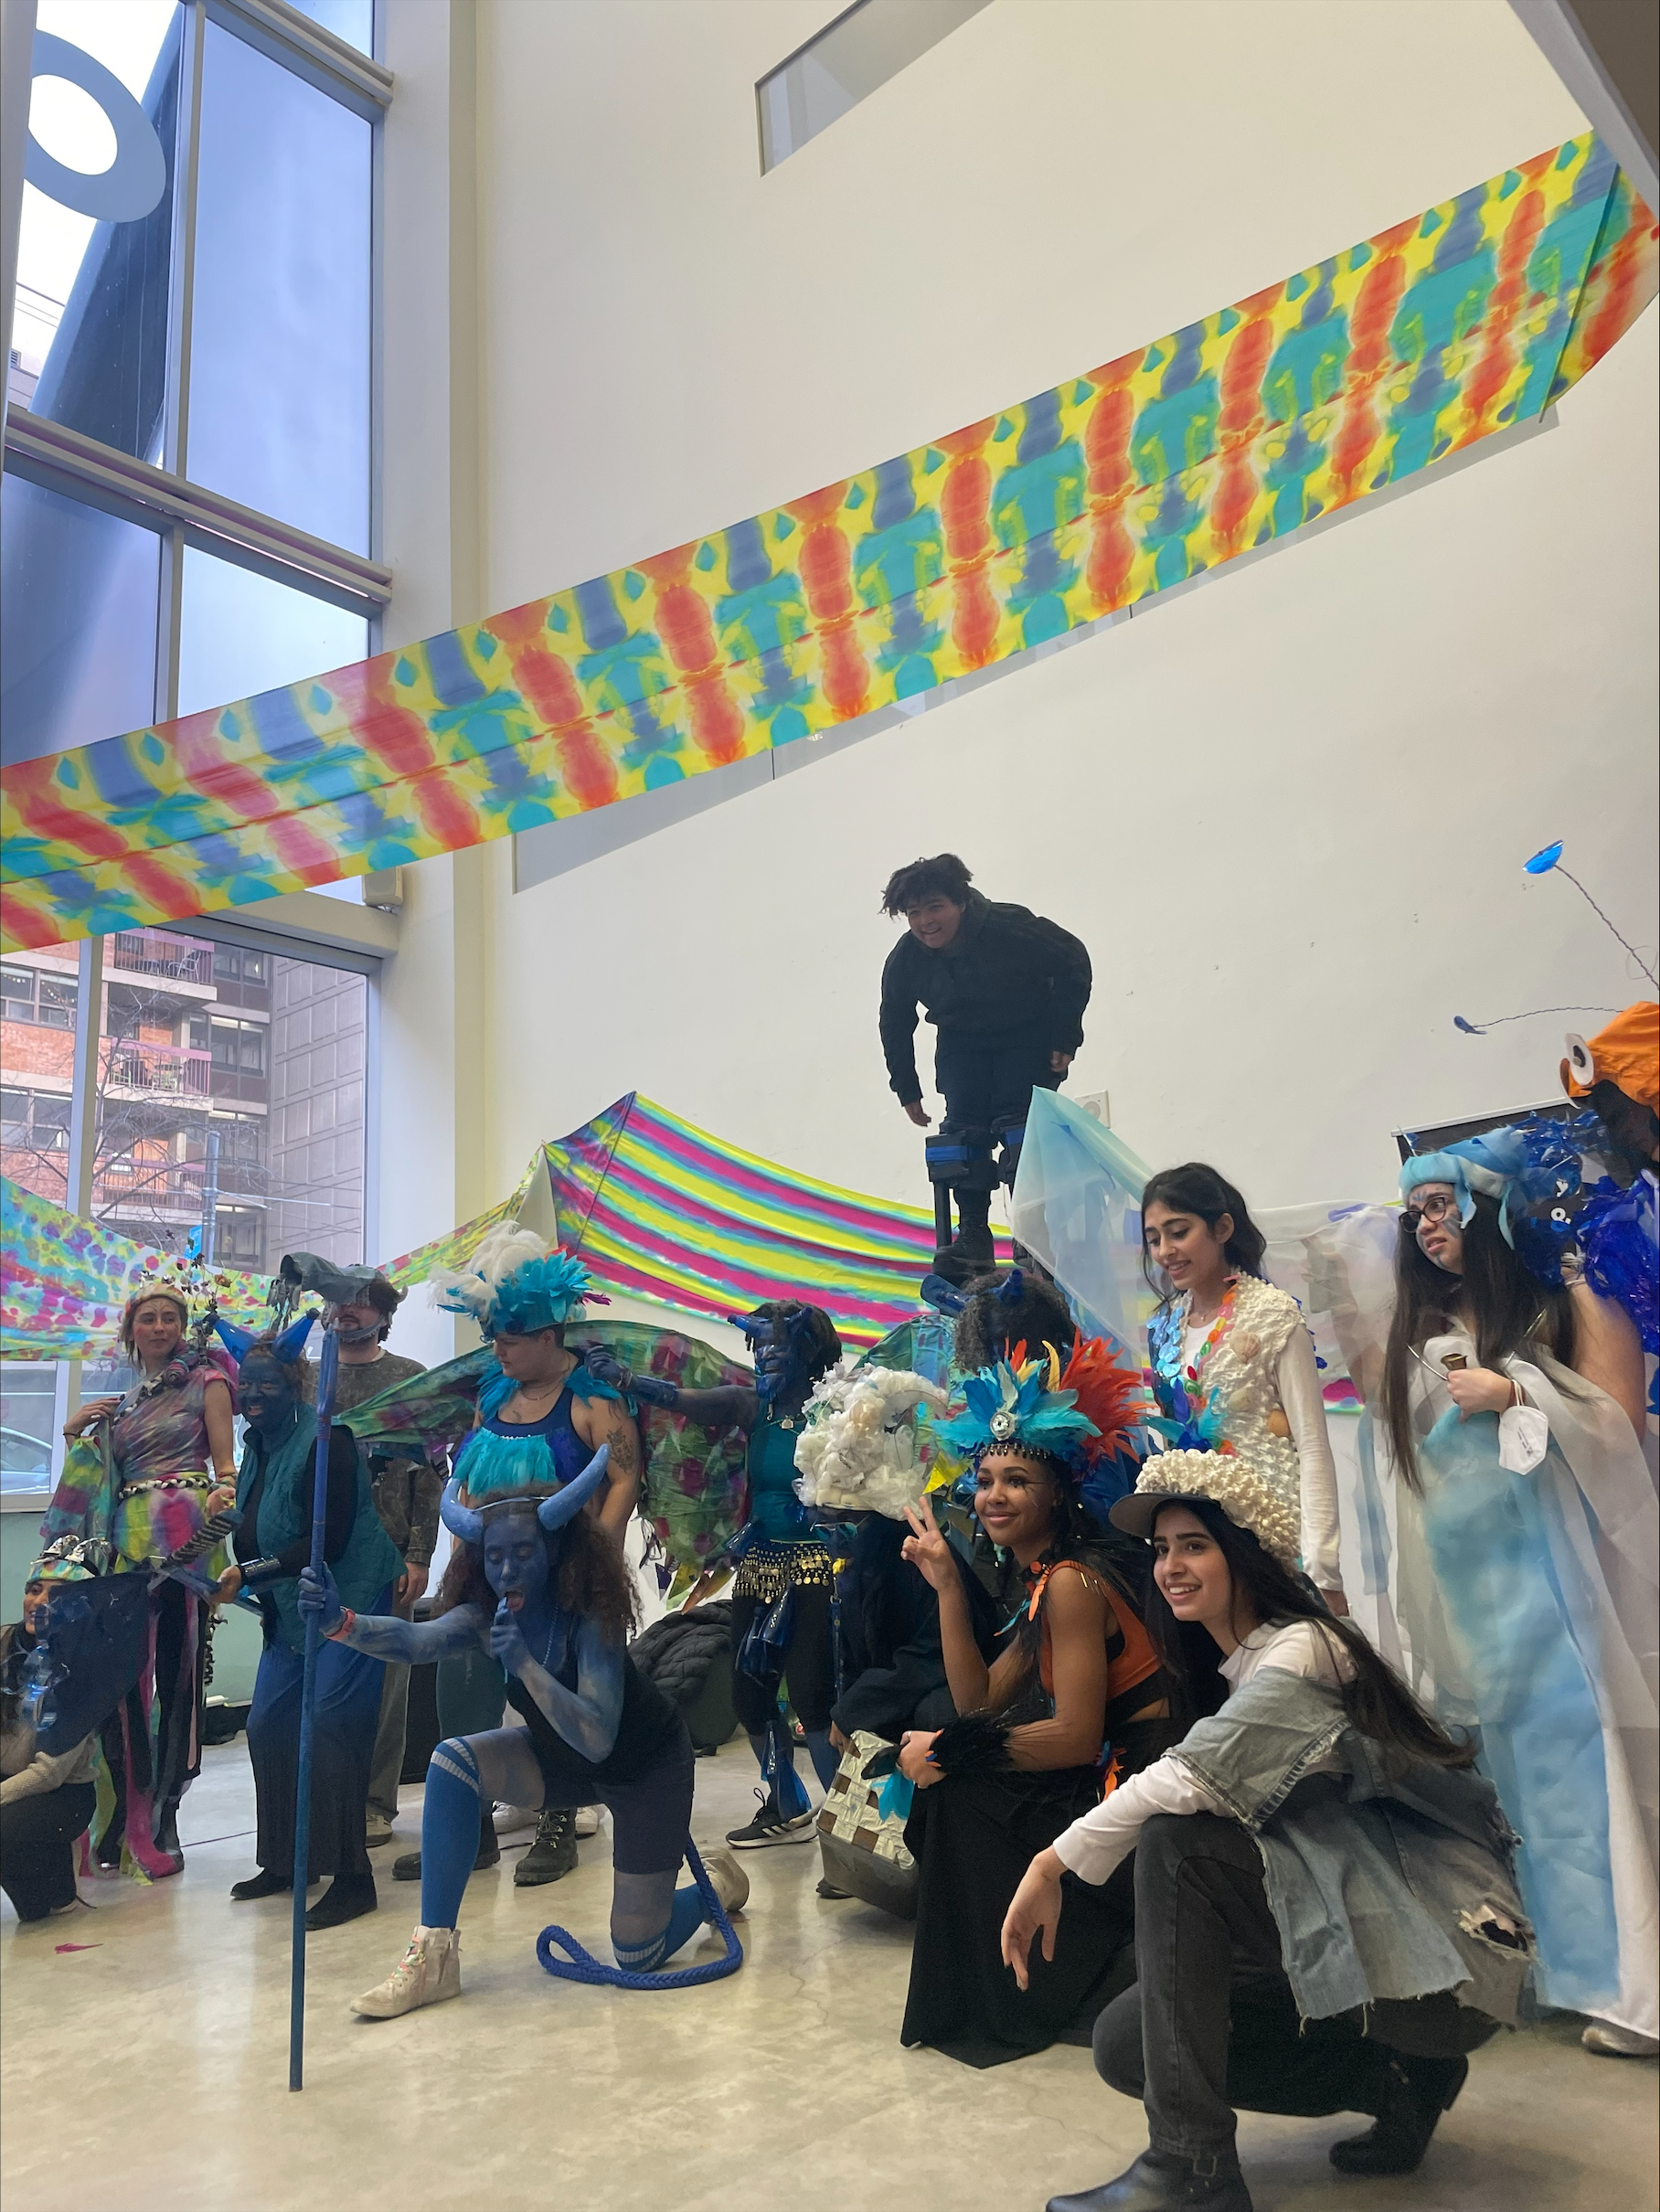 A group of participants in upcycled Mas costumes stand smiling in the lobby at 100 McCaul St. A colourful banner hangs above them. 